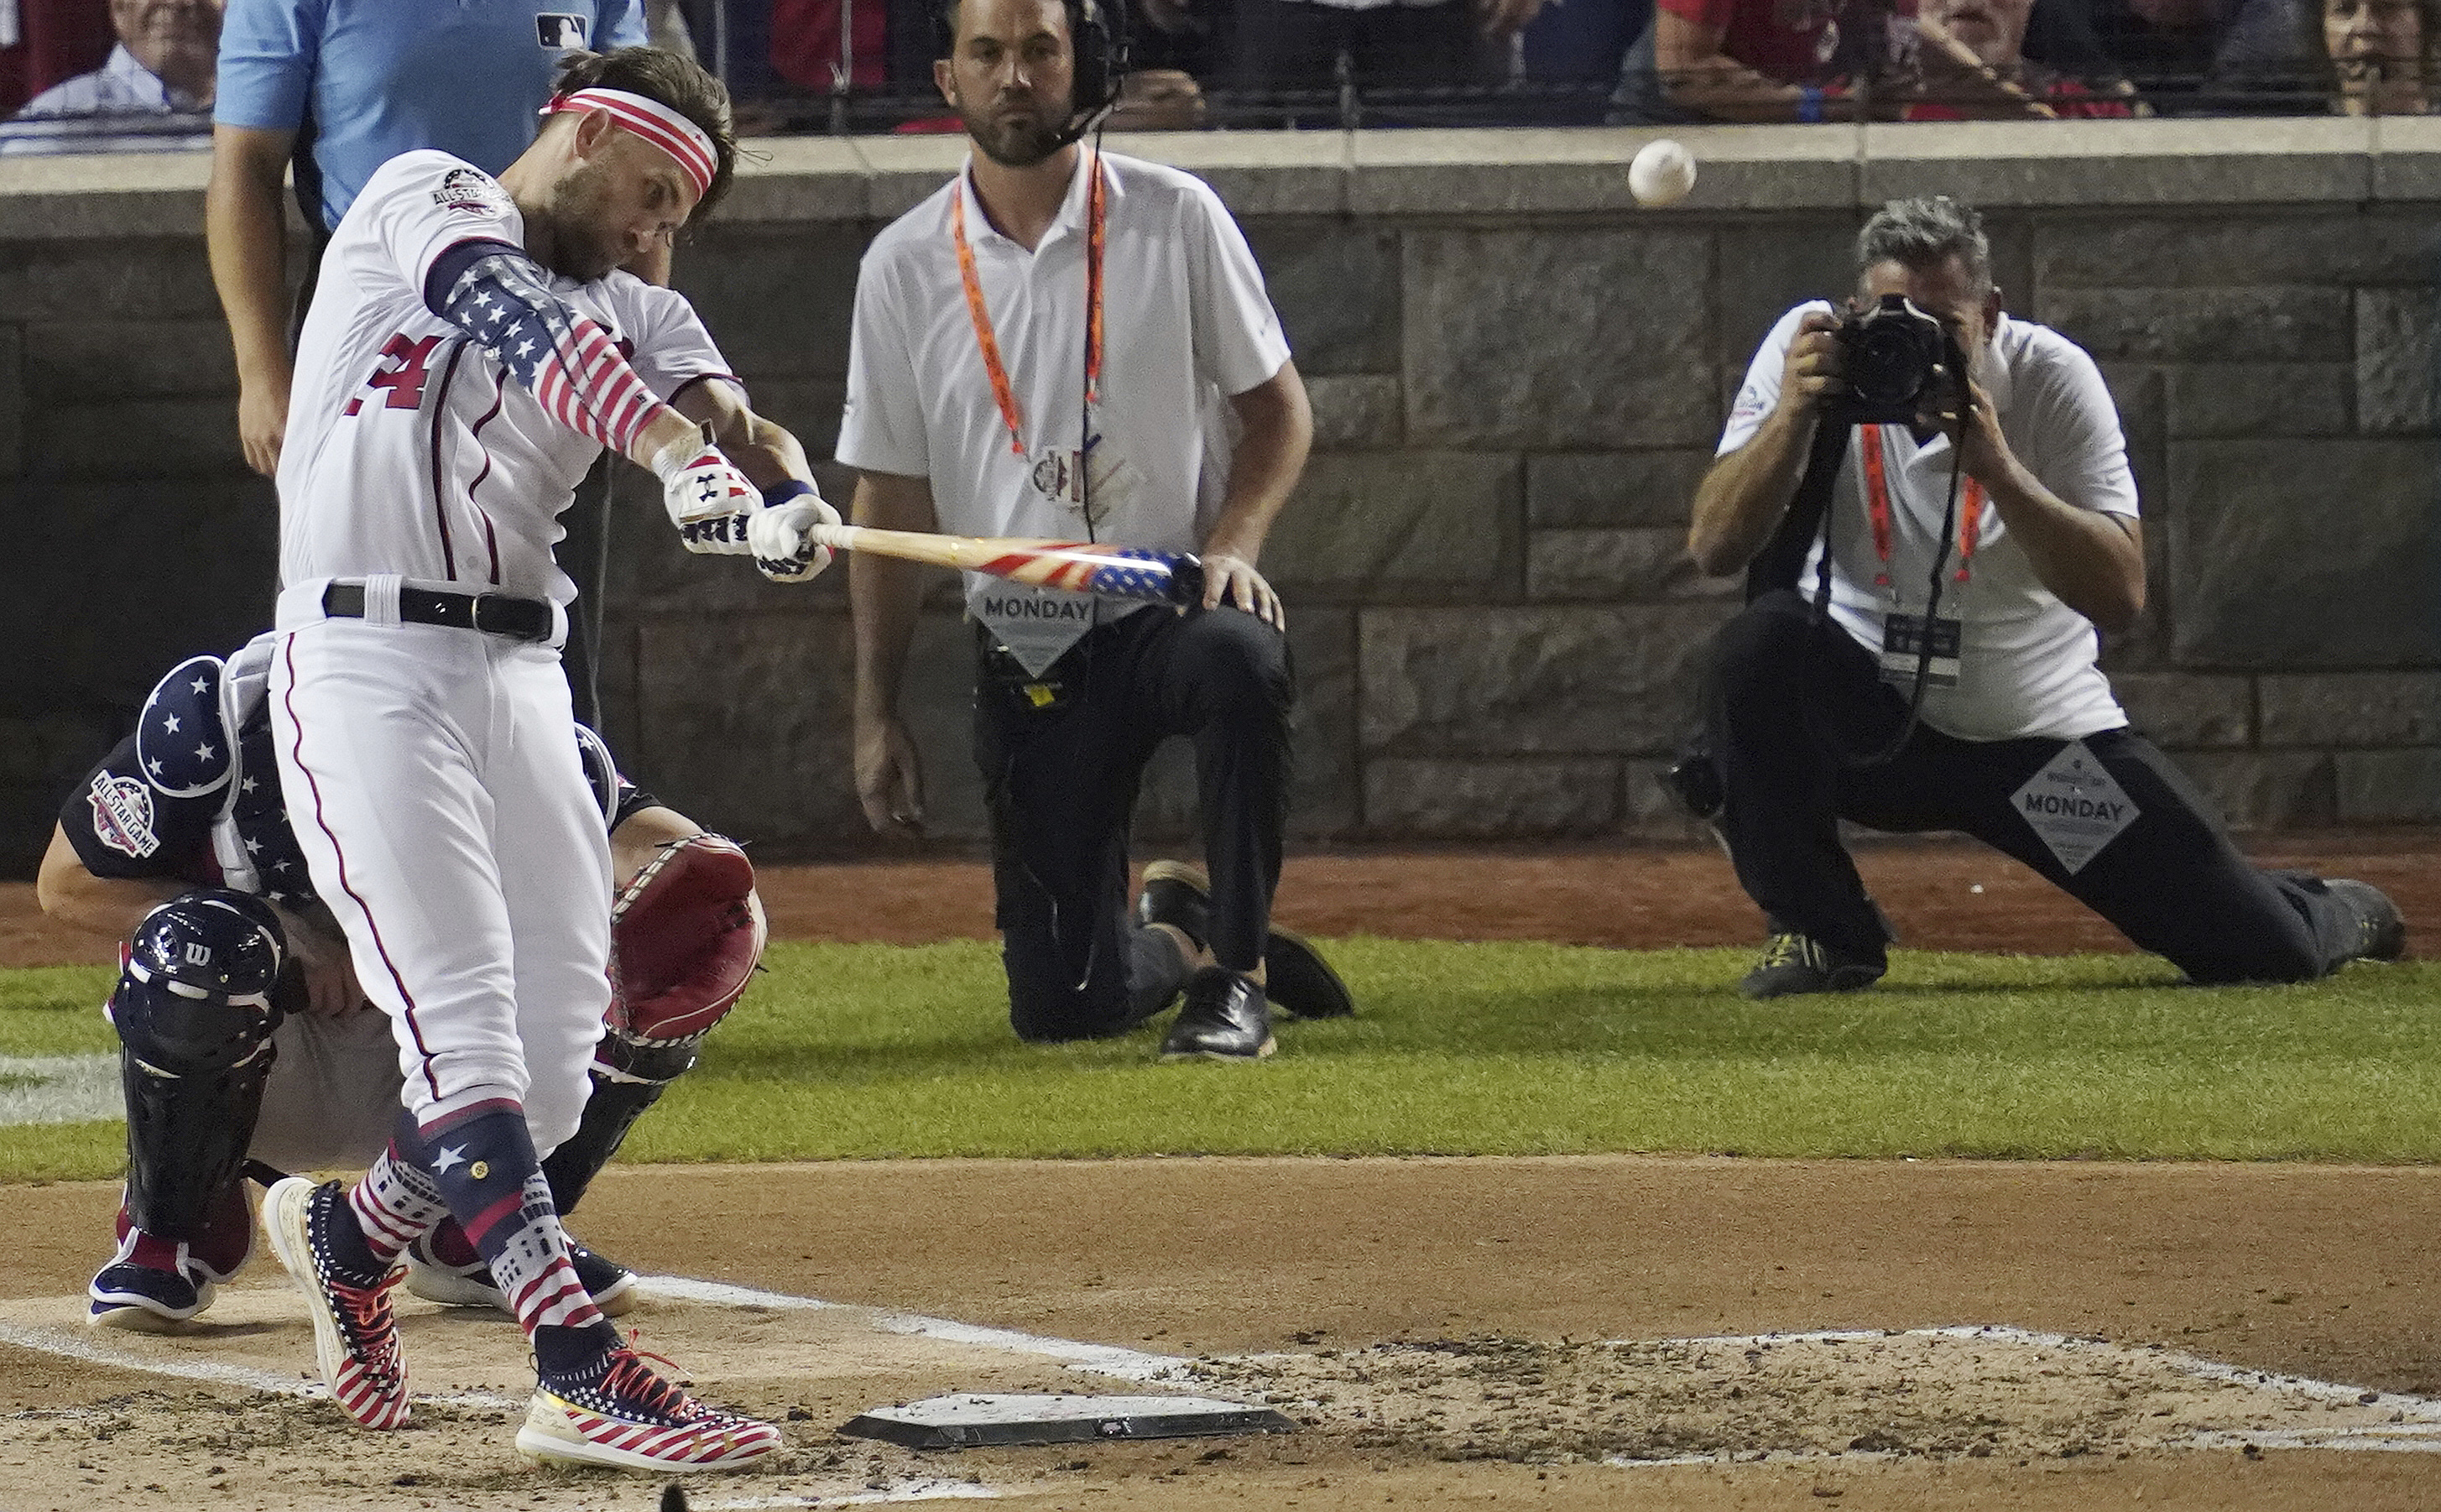 Washington Nationals' Bryce Harper of the National League bats in the 2018  Home Run Derby during the All Star break at Nationals Park in Washington,  D.C. on July 16, 2018. Photo by